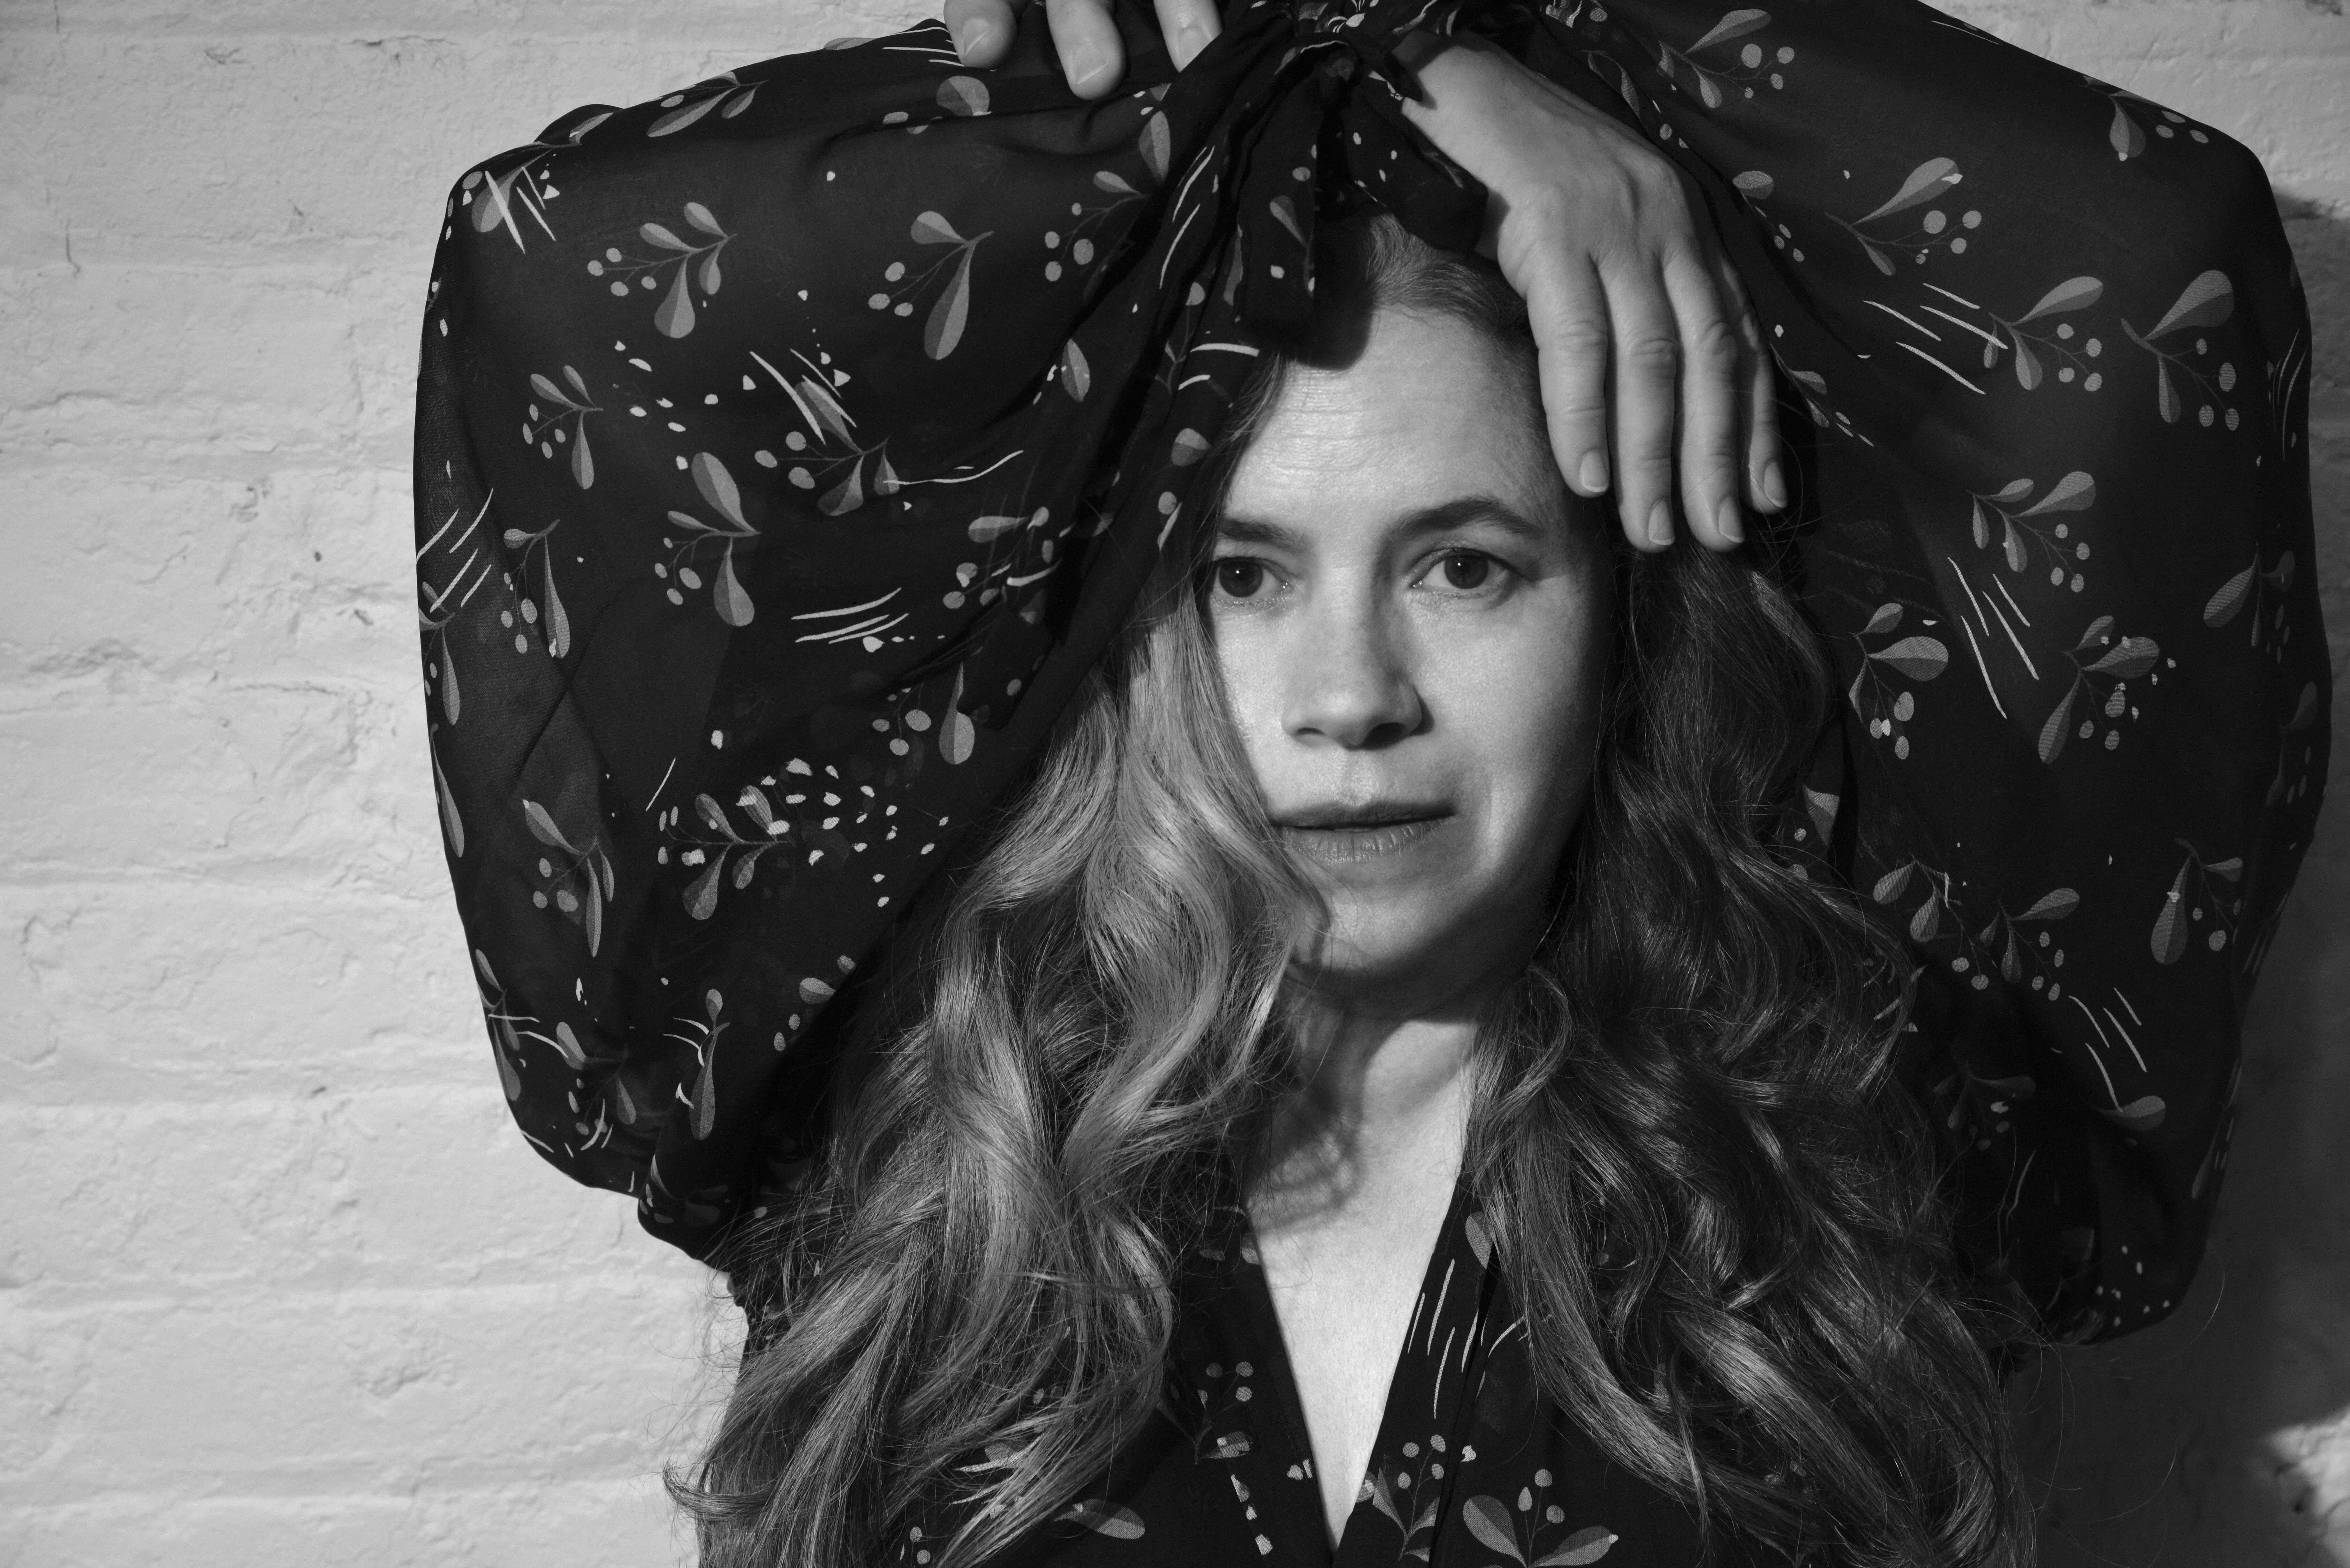 exclusive presale code for An Evening with Natalie Merchant: Keep Your Courage Tour advanced tickets in Newark